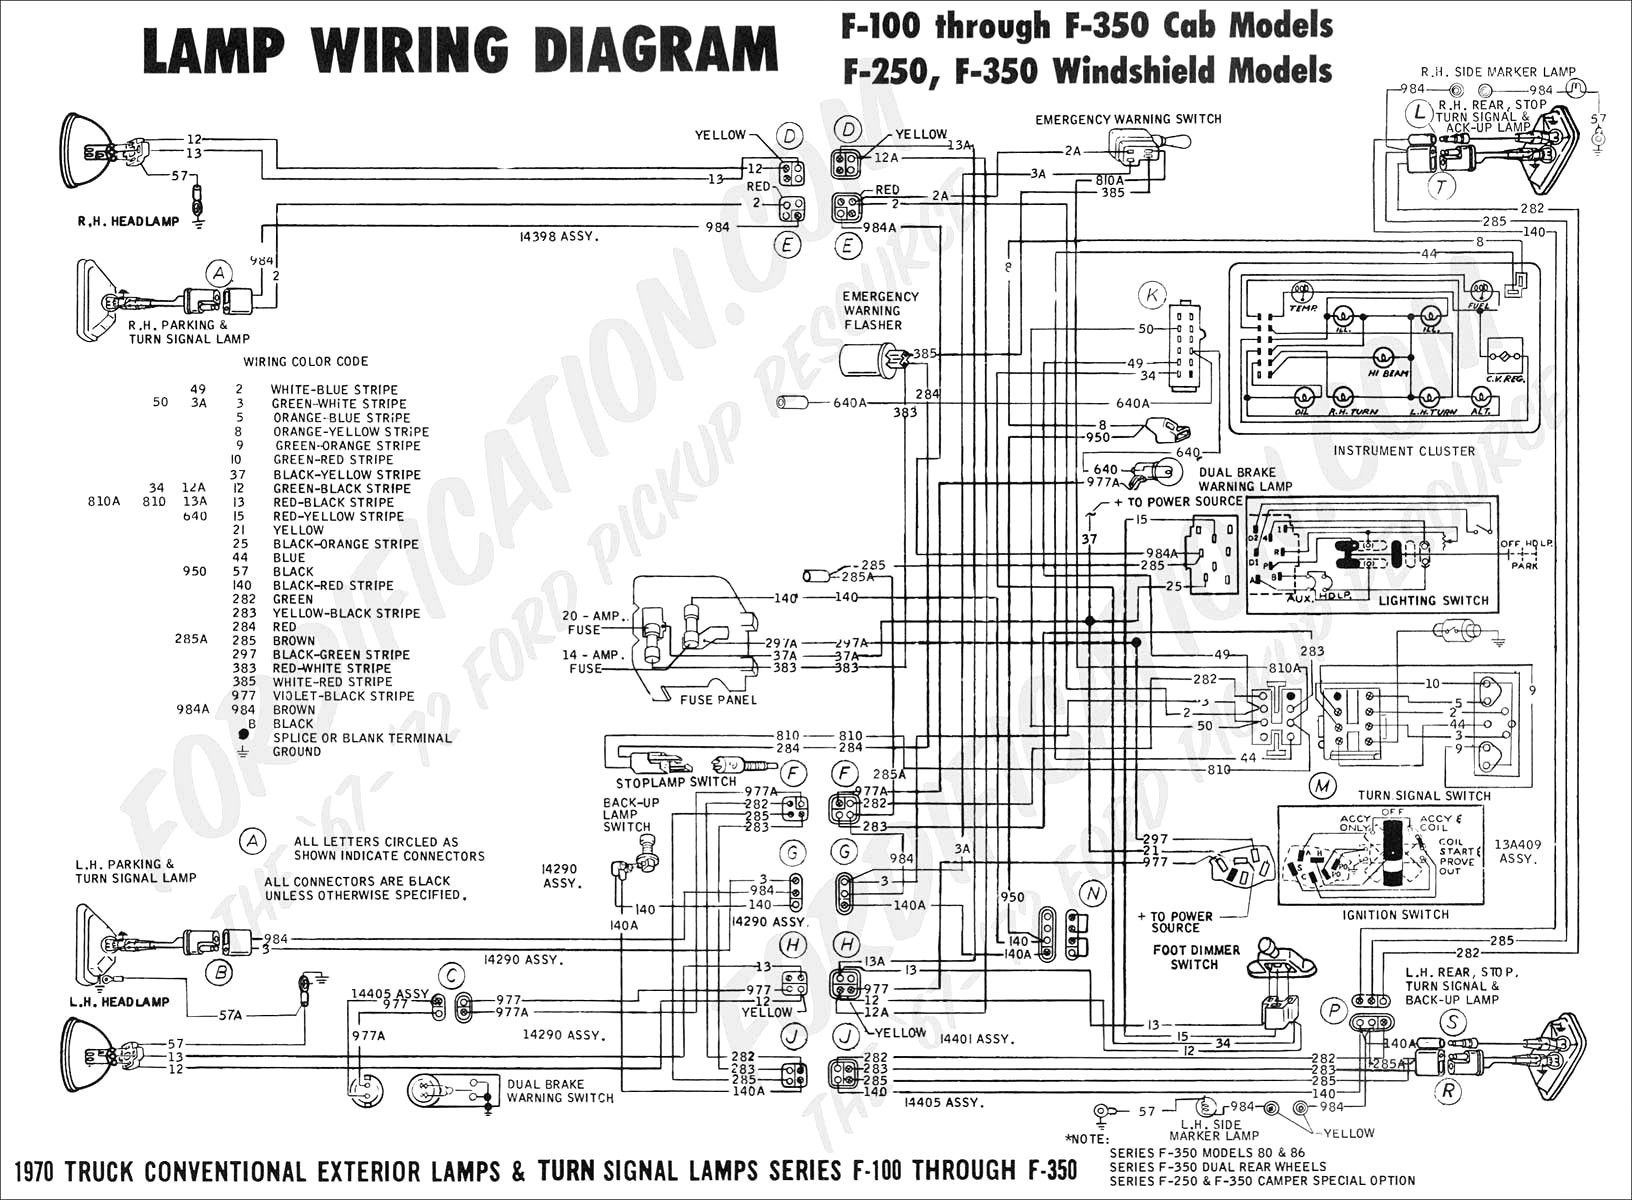 1965 mustang ignition wiring diagram Download 350 wiring diagram on wiring diagram for 1991 ford